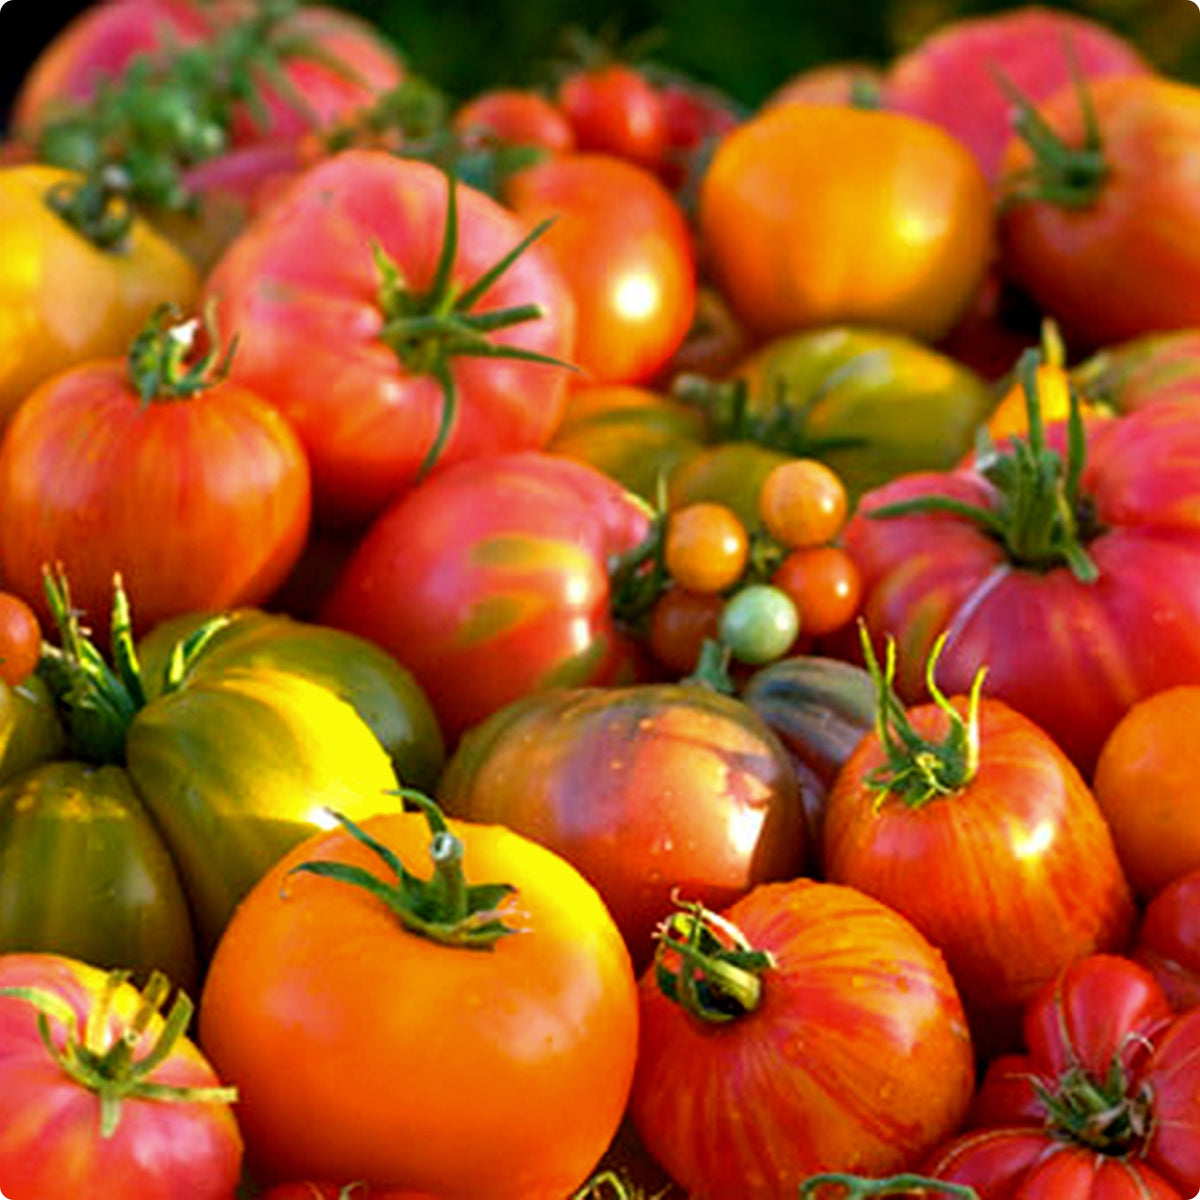 Heirloom Heritage Tomato Seeds Available from a Canadian Seed Company – The  Incredible Seed Company Ltd